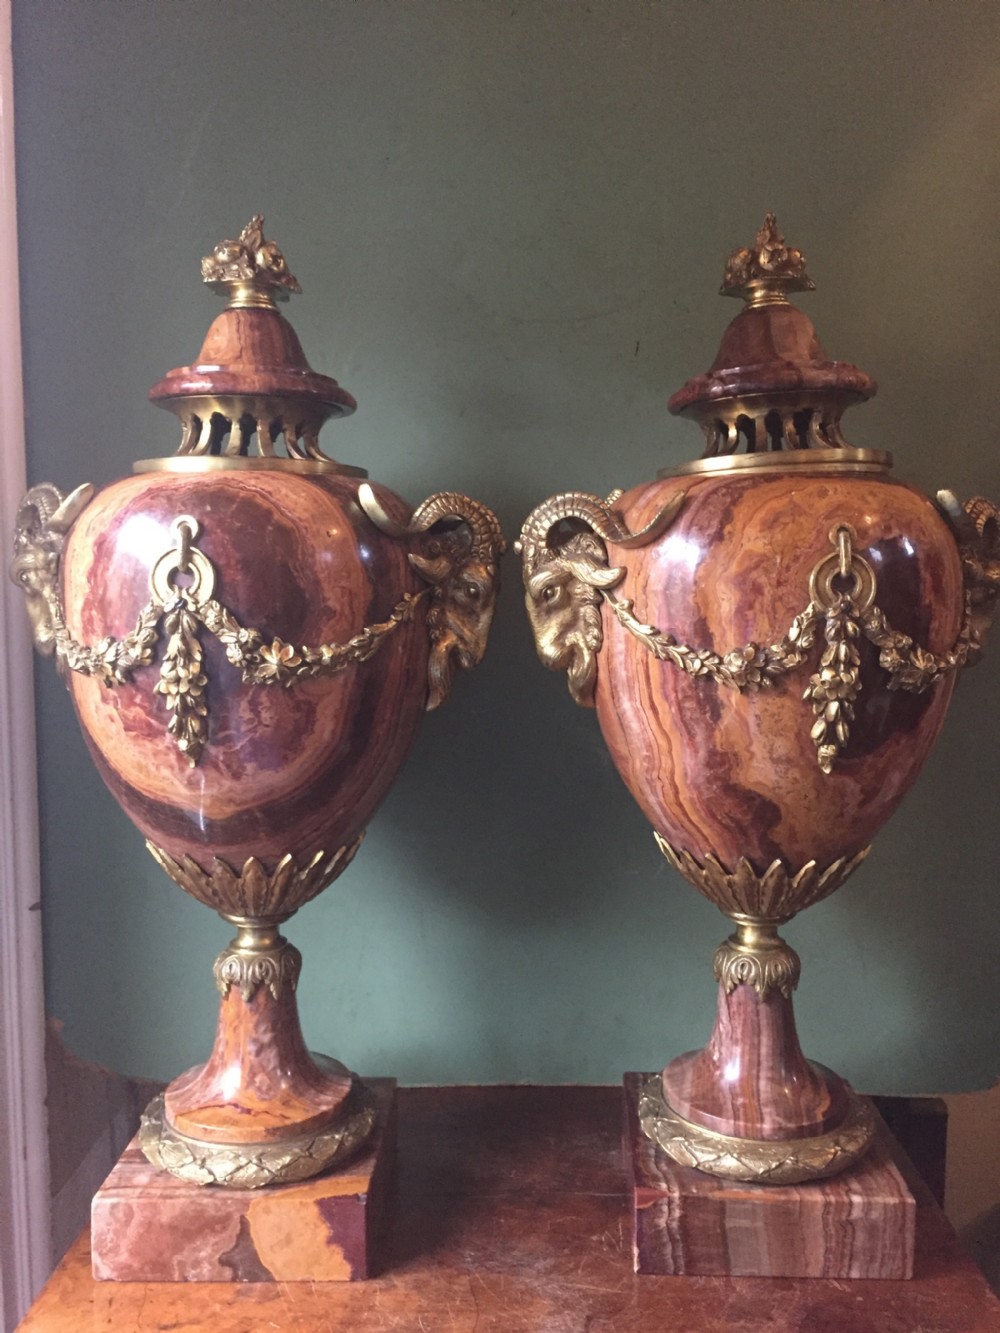 spectacular large pair of french late c19th louis xvi style 'alabastro fiorito' marble and ormolu bronze mounted vases